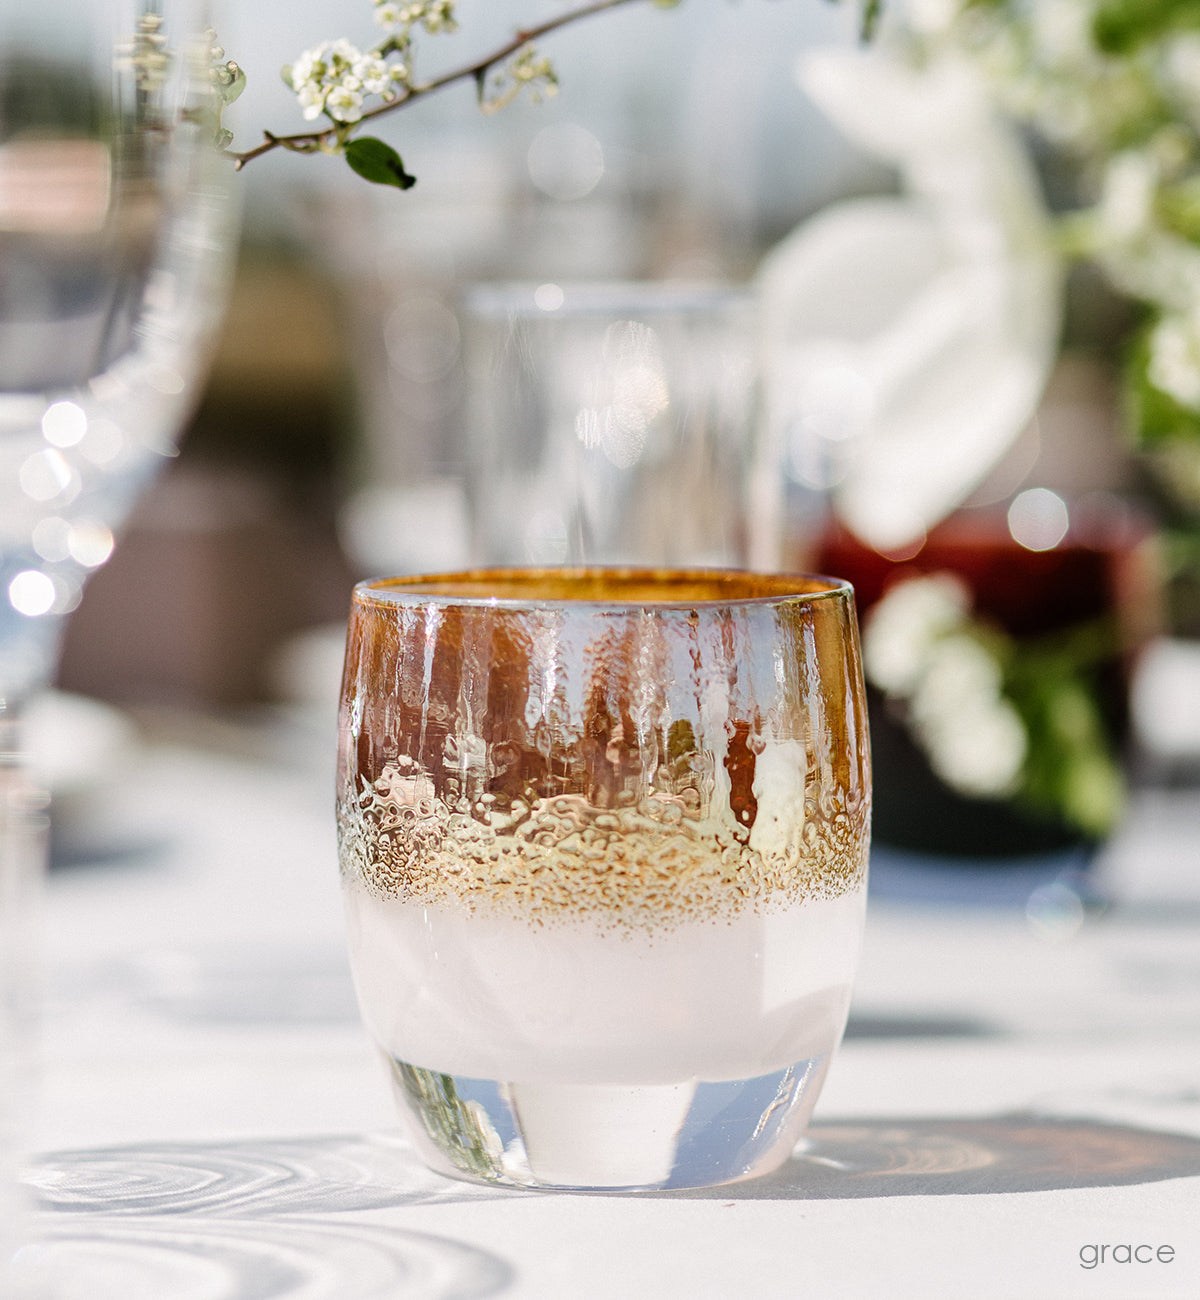 grace golden topped white hand-blown glass votive candle holder on a white table in the sun with drinking glasses and flowers in background.